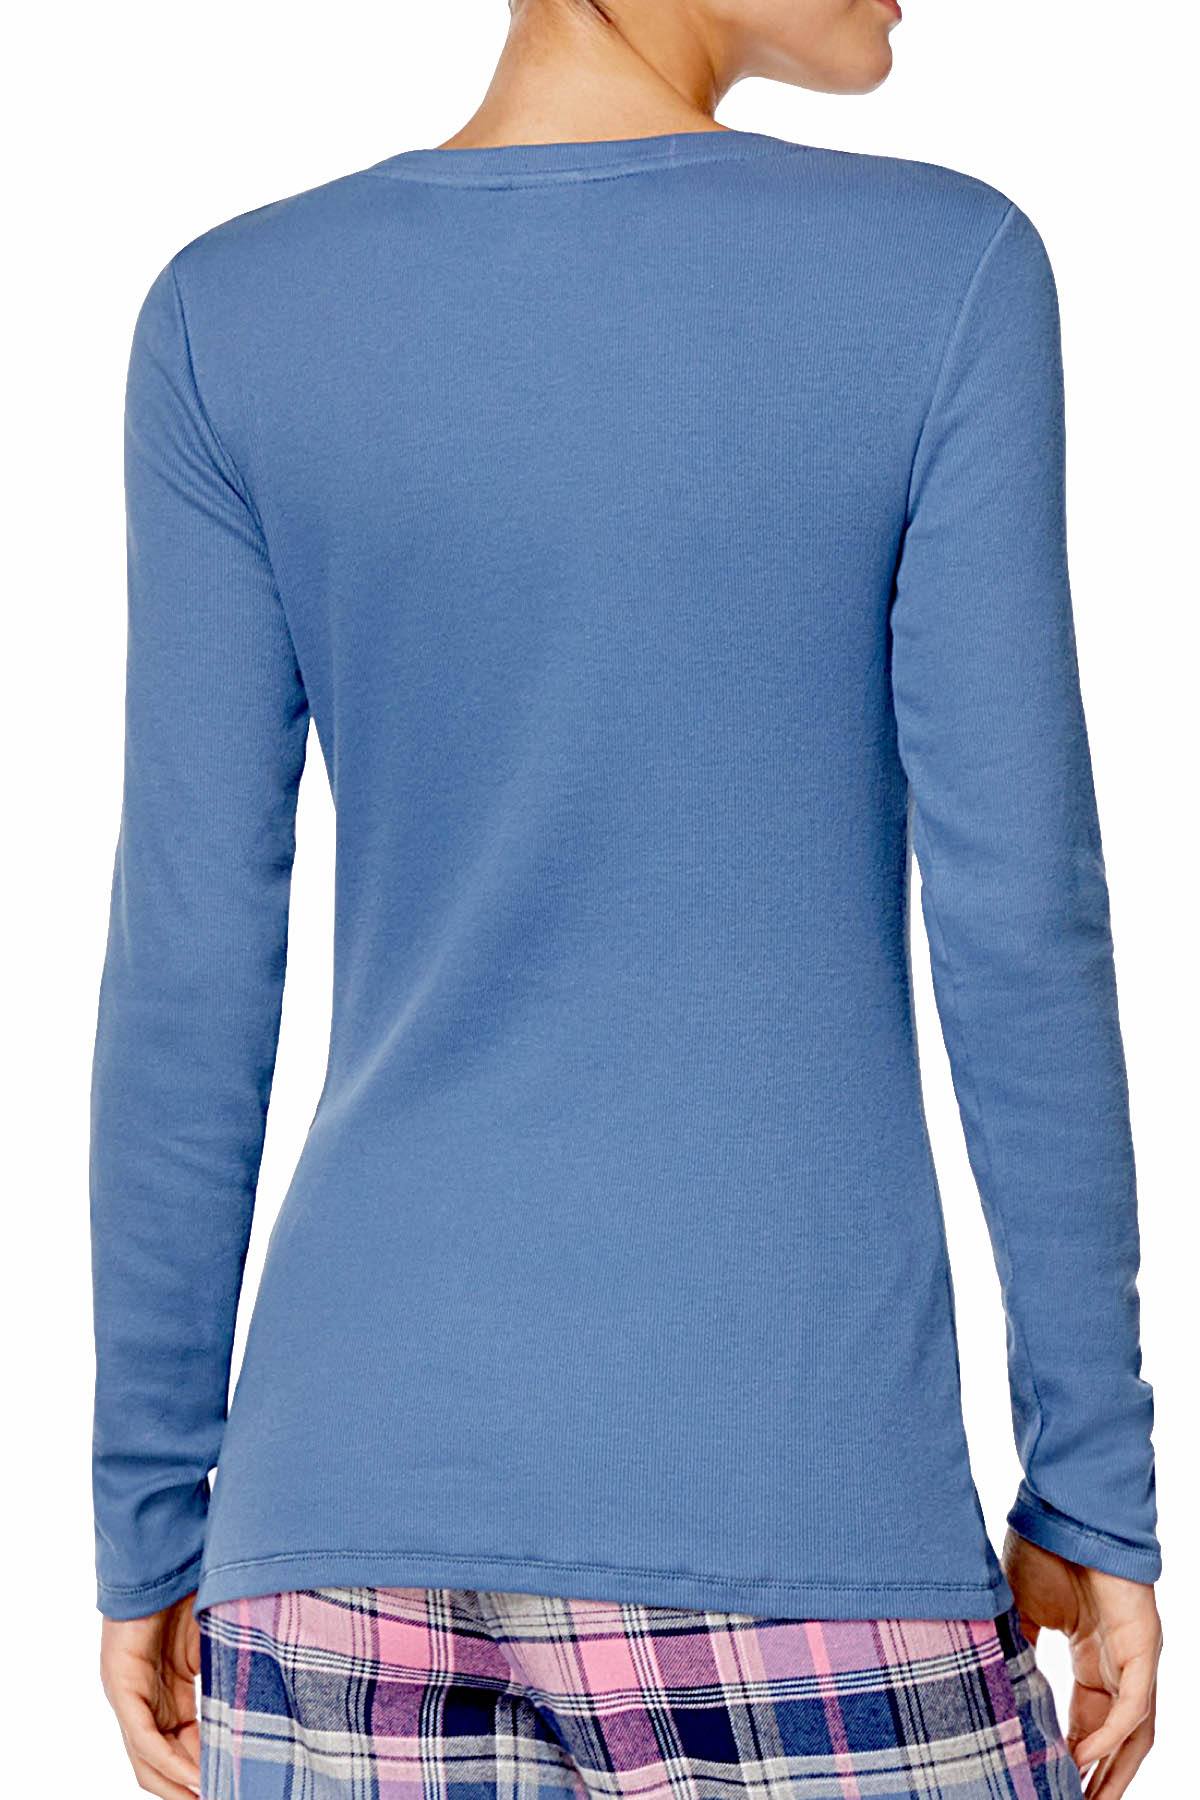 Jenni Ribbed Lounge Top in Blue Skyline